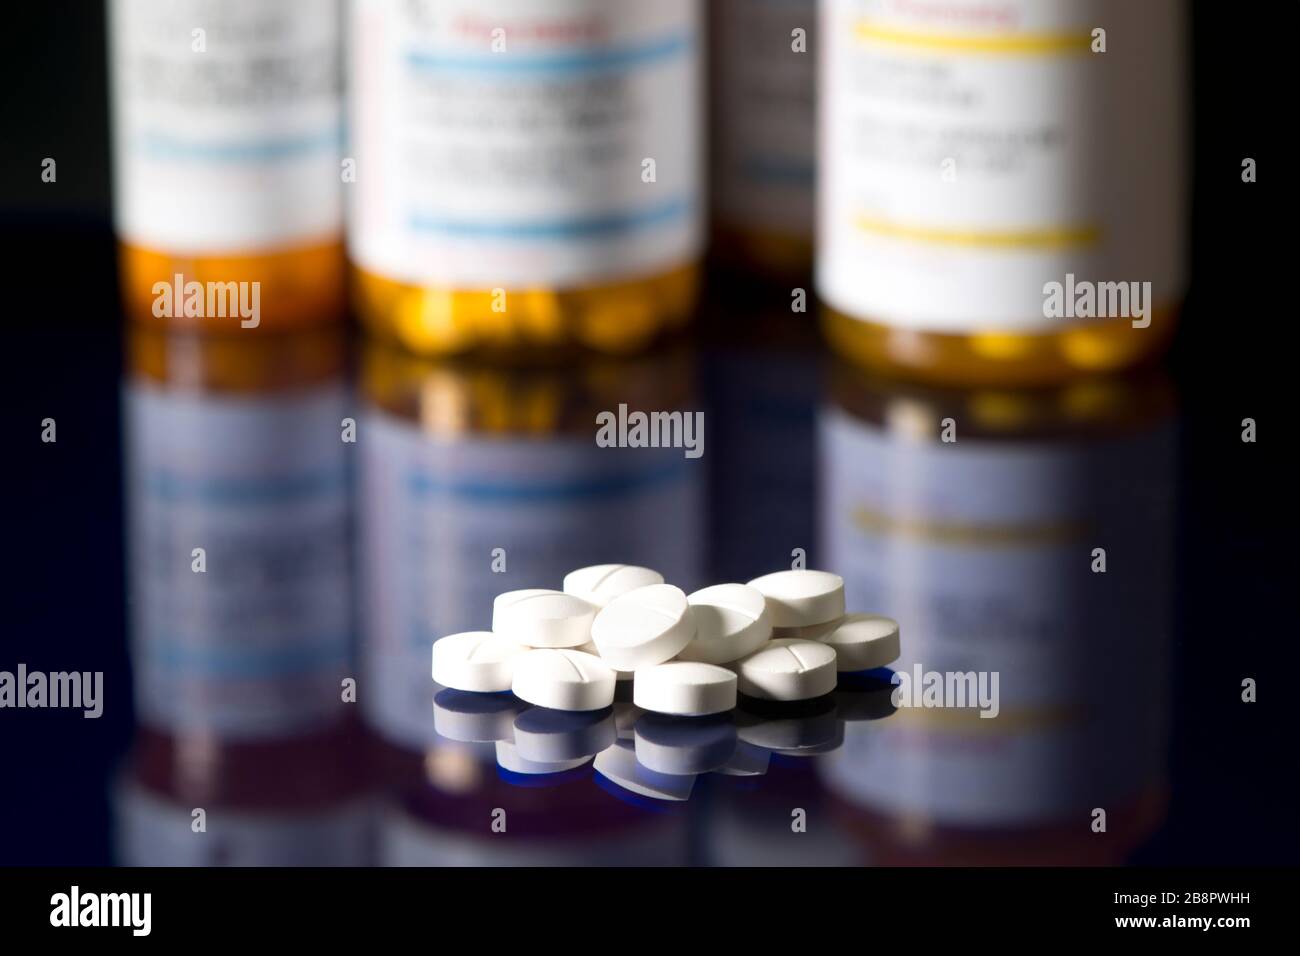 White tablets on dark reflective surface with prescription bottles in background. Stock Photo